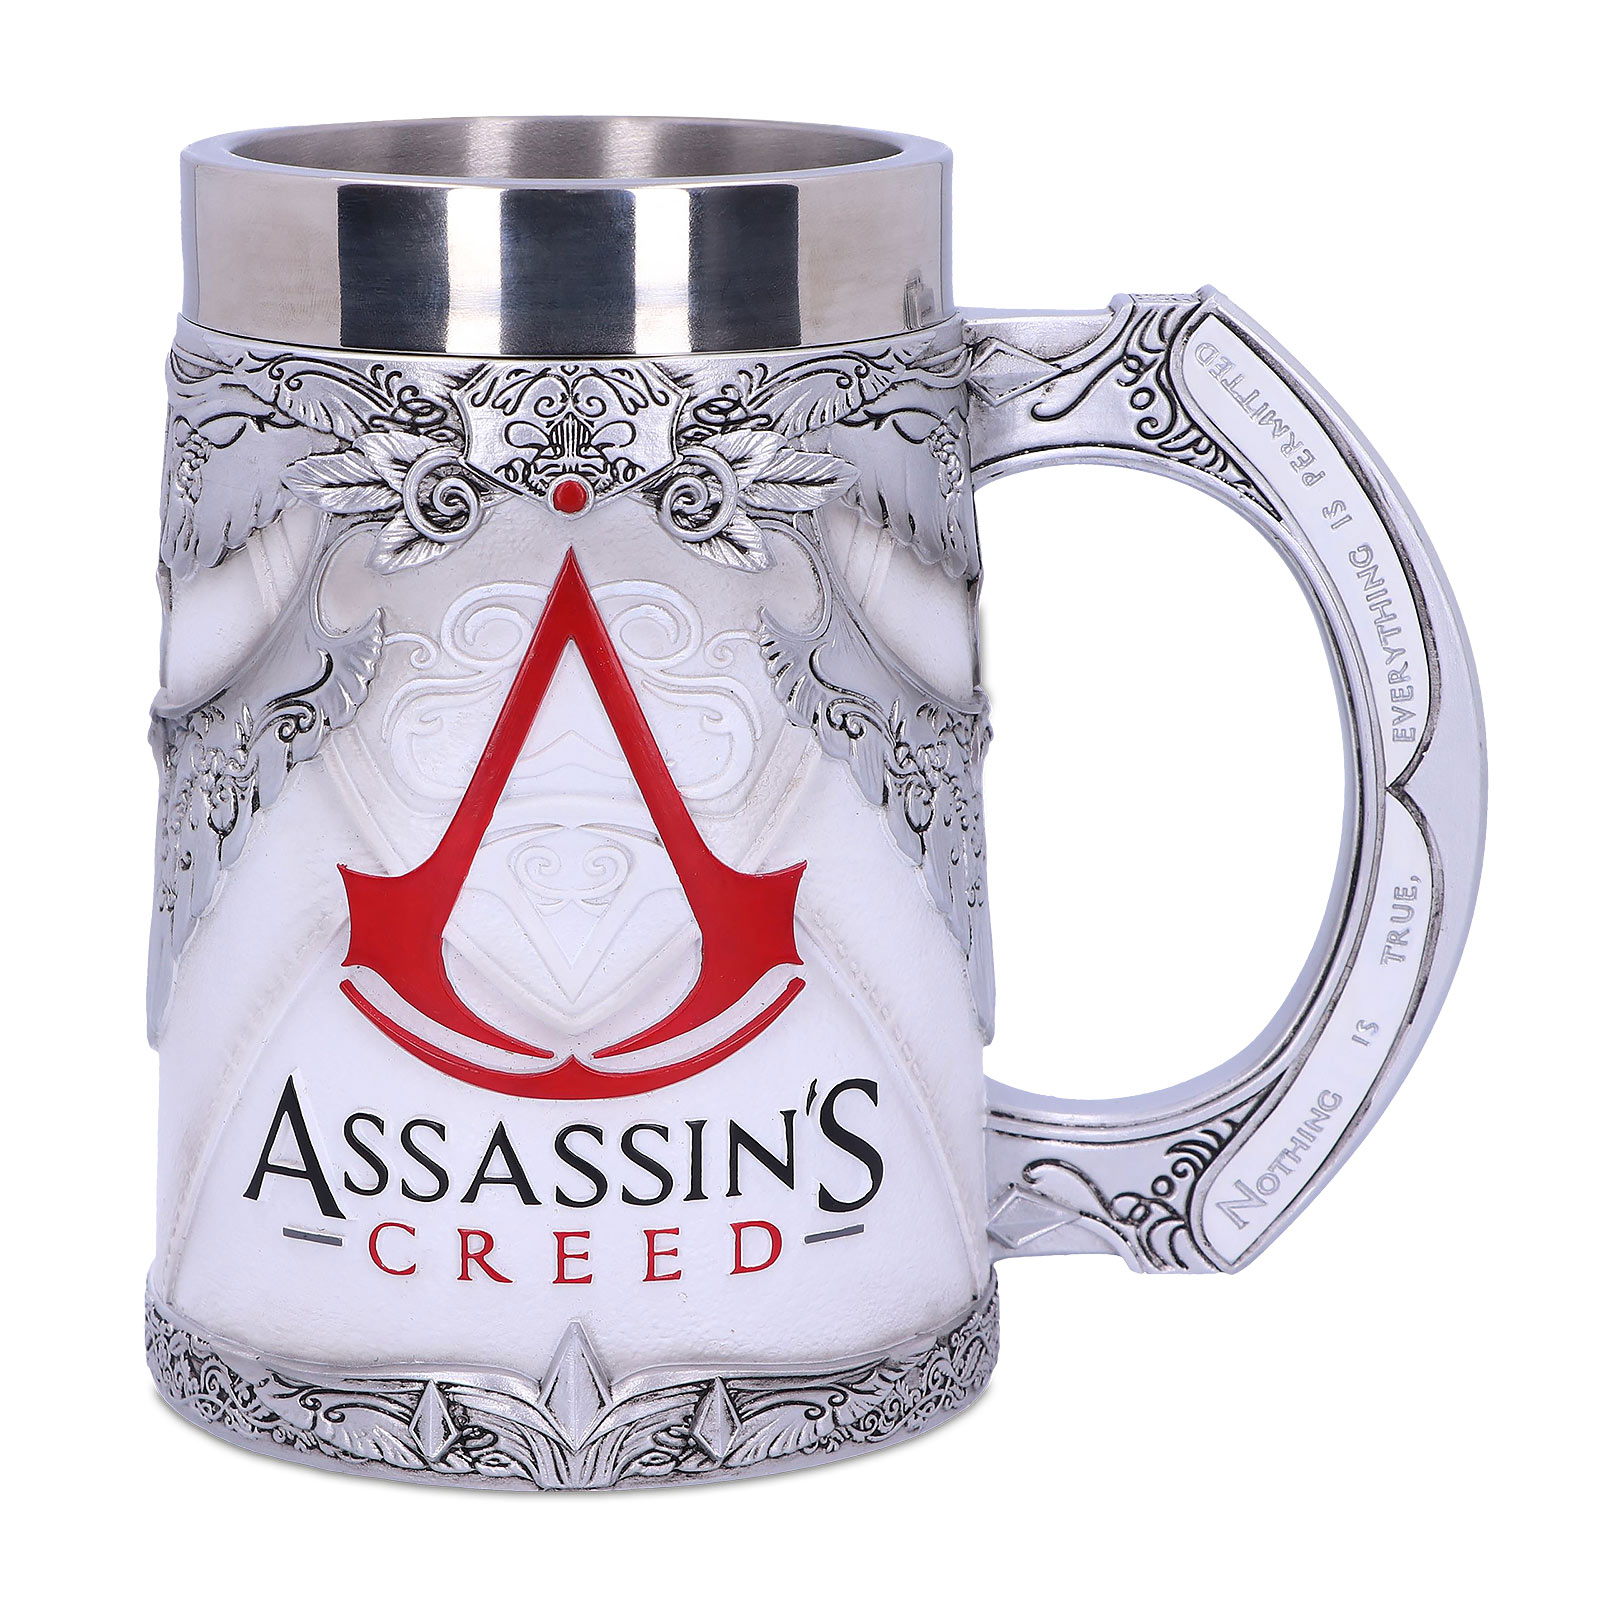 Assassin's Creed - Classic Logo Krug deluxe